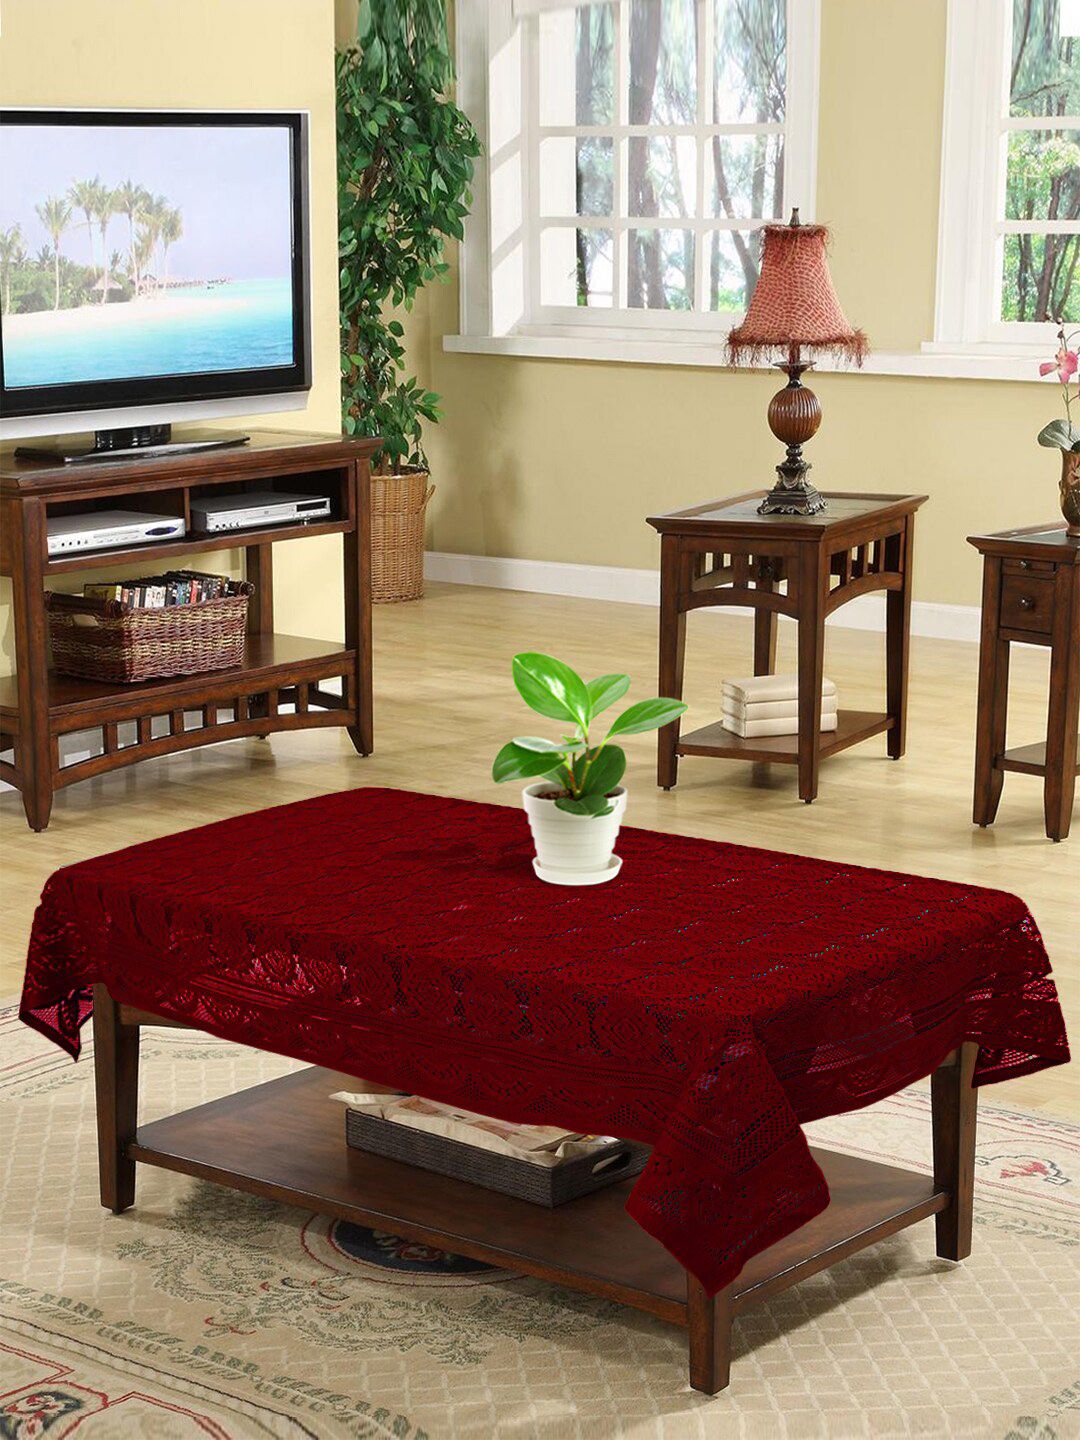 Kuber Industries Maroon Geometric Printed 4 Seater Cotton Table Cover Price in India